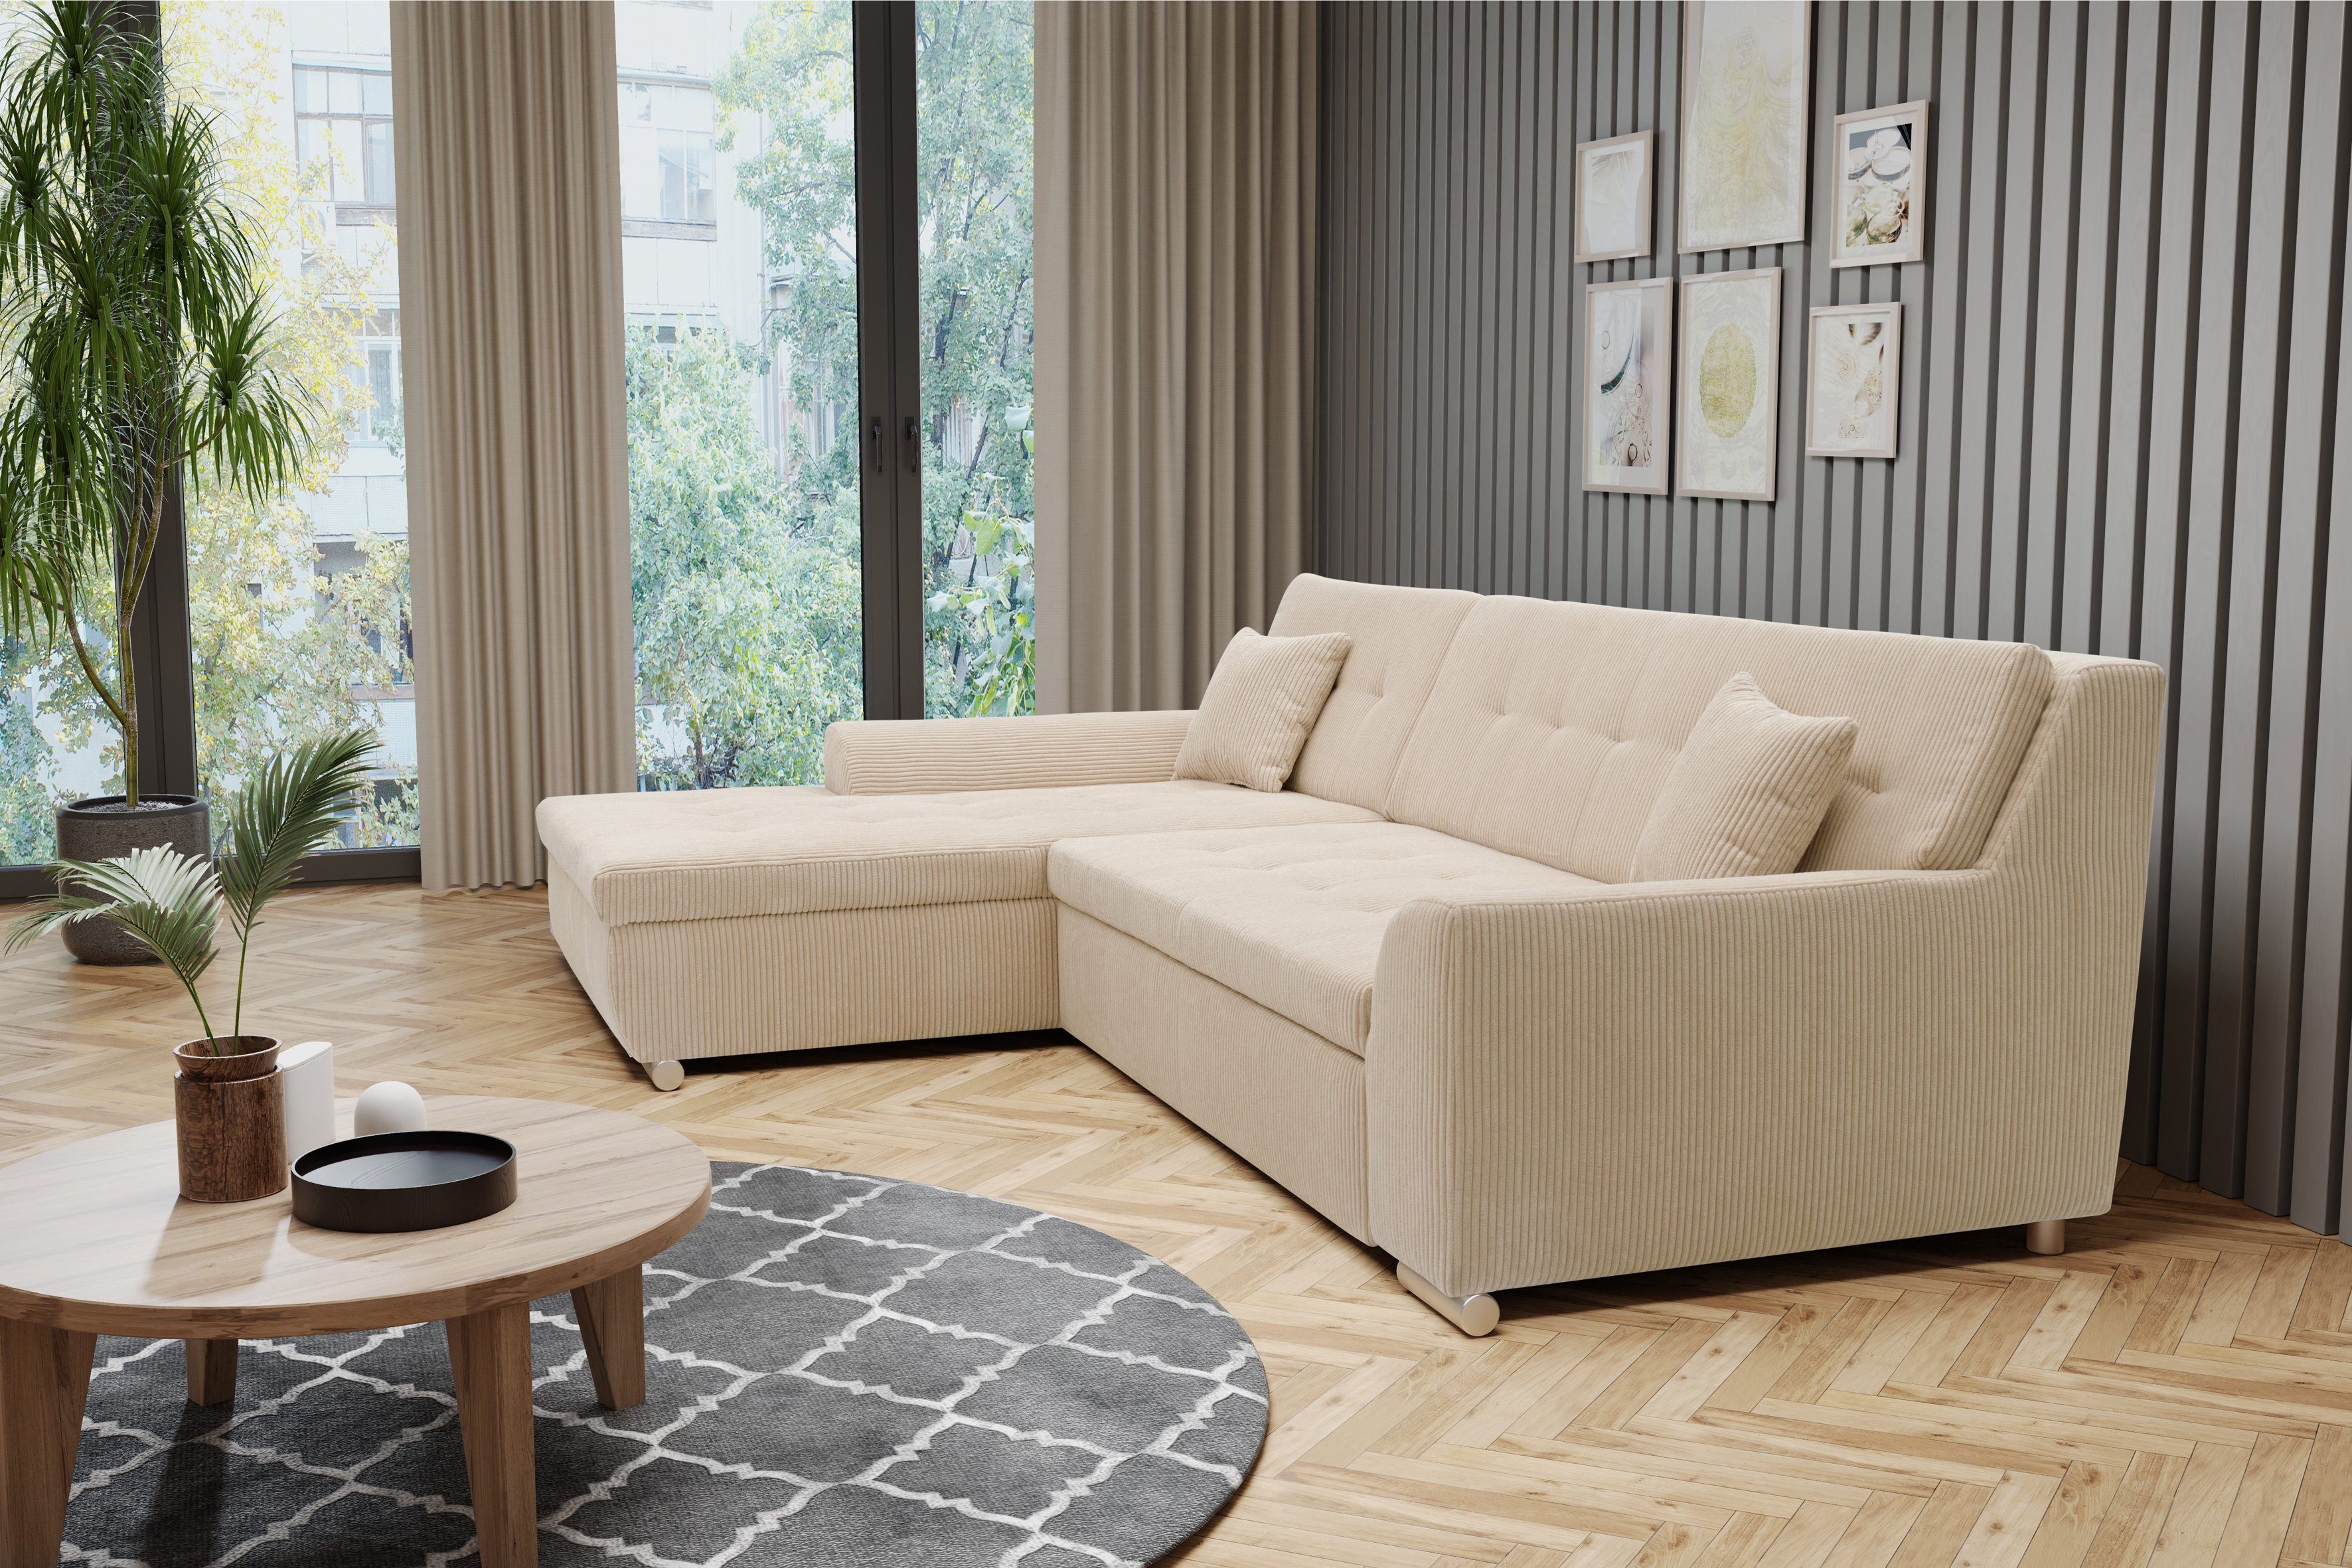 mit collection DOMO Cord wahlweise Ecksofa in Treviso, Bettfunktion, auch